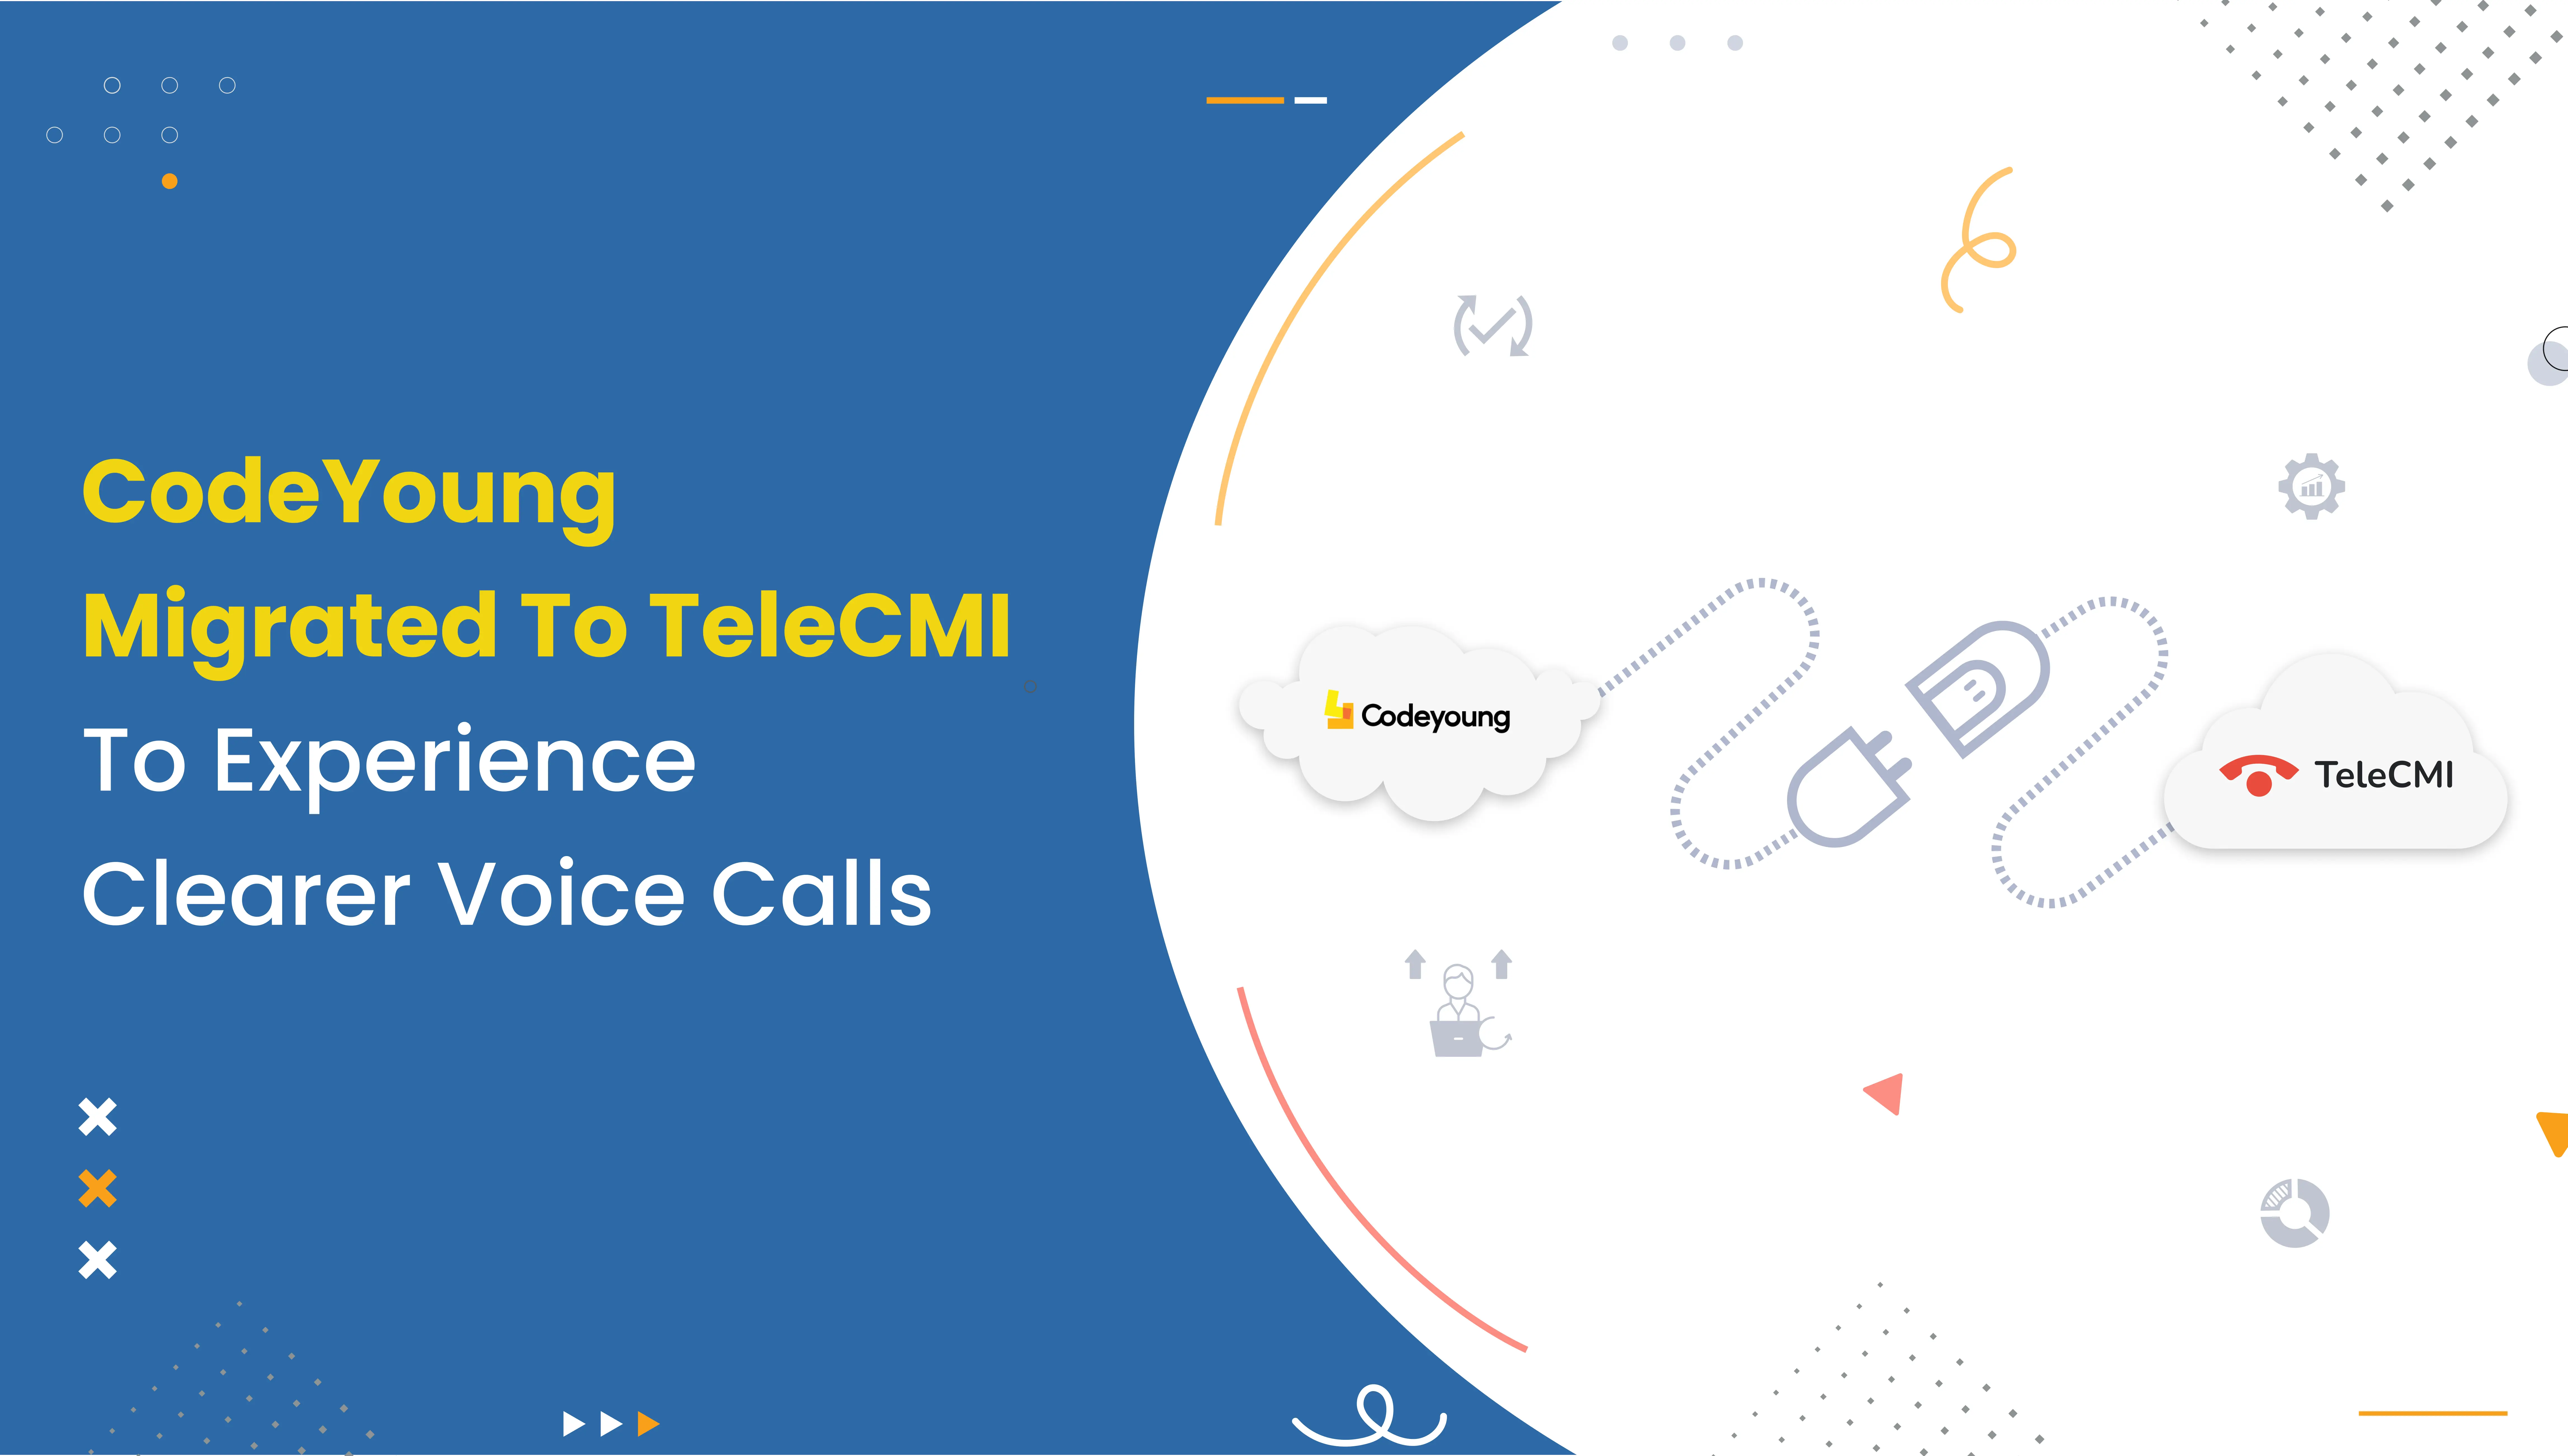 CodeYoung migrated to TeleCMI to experience clearer voice calls